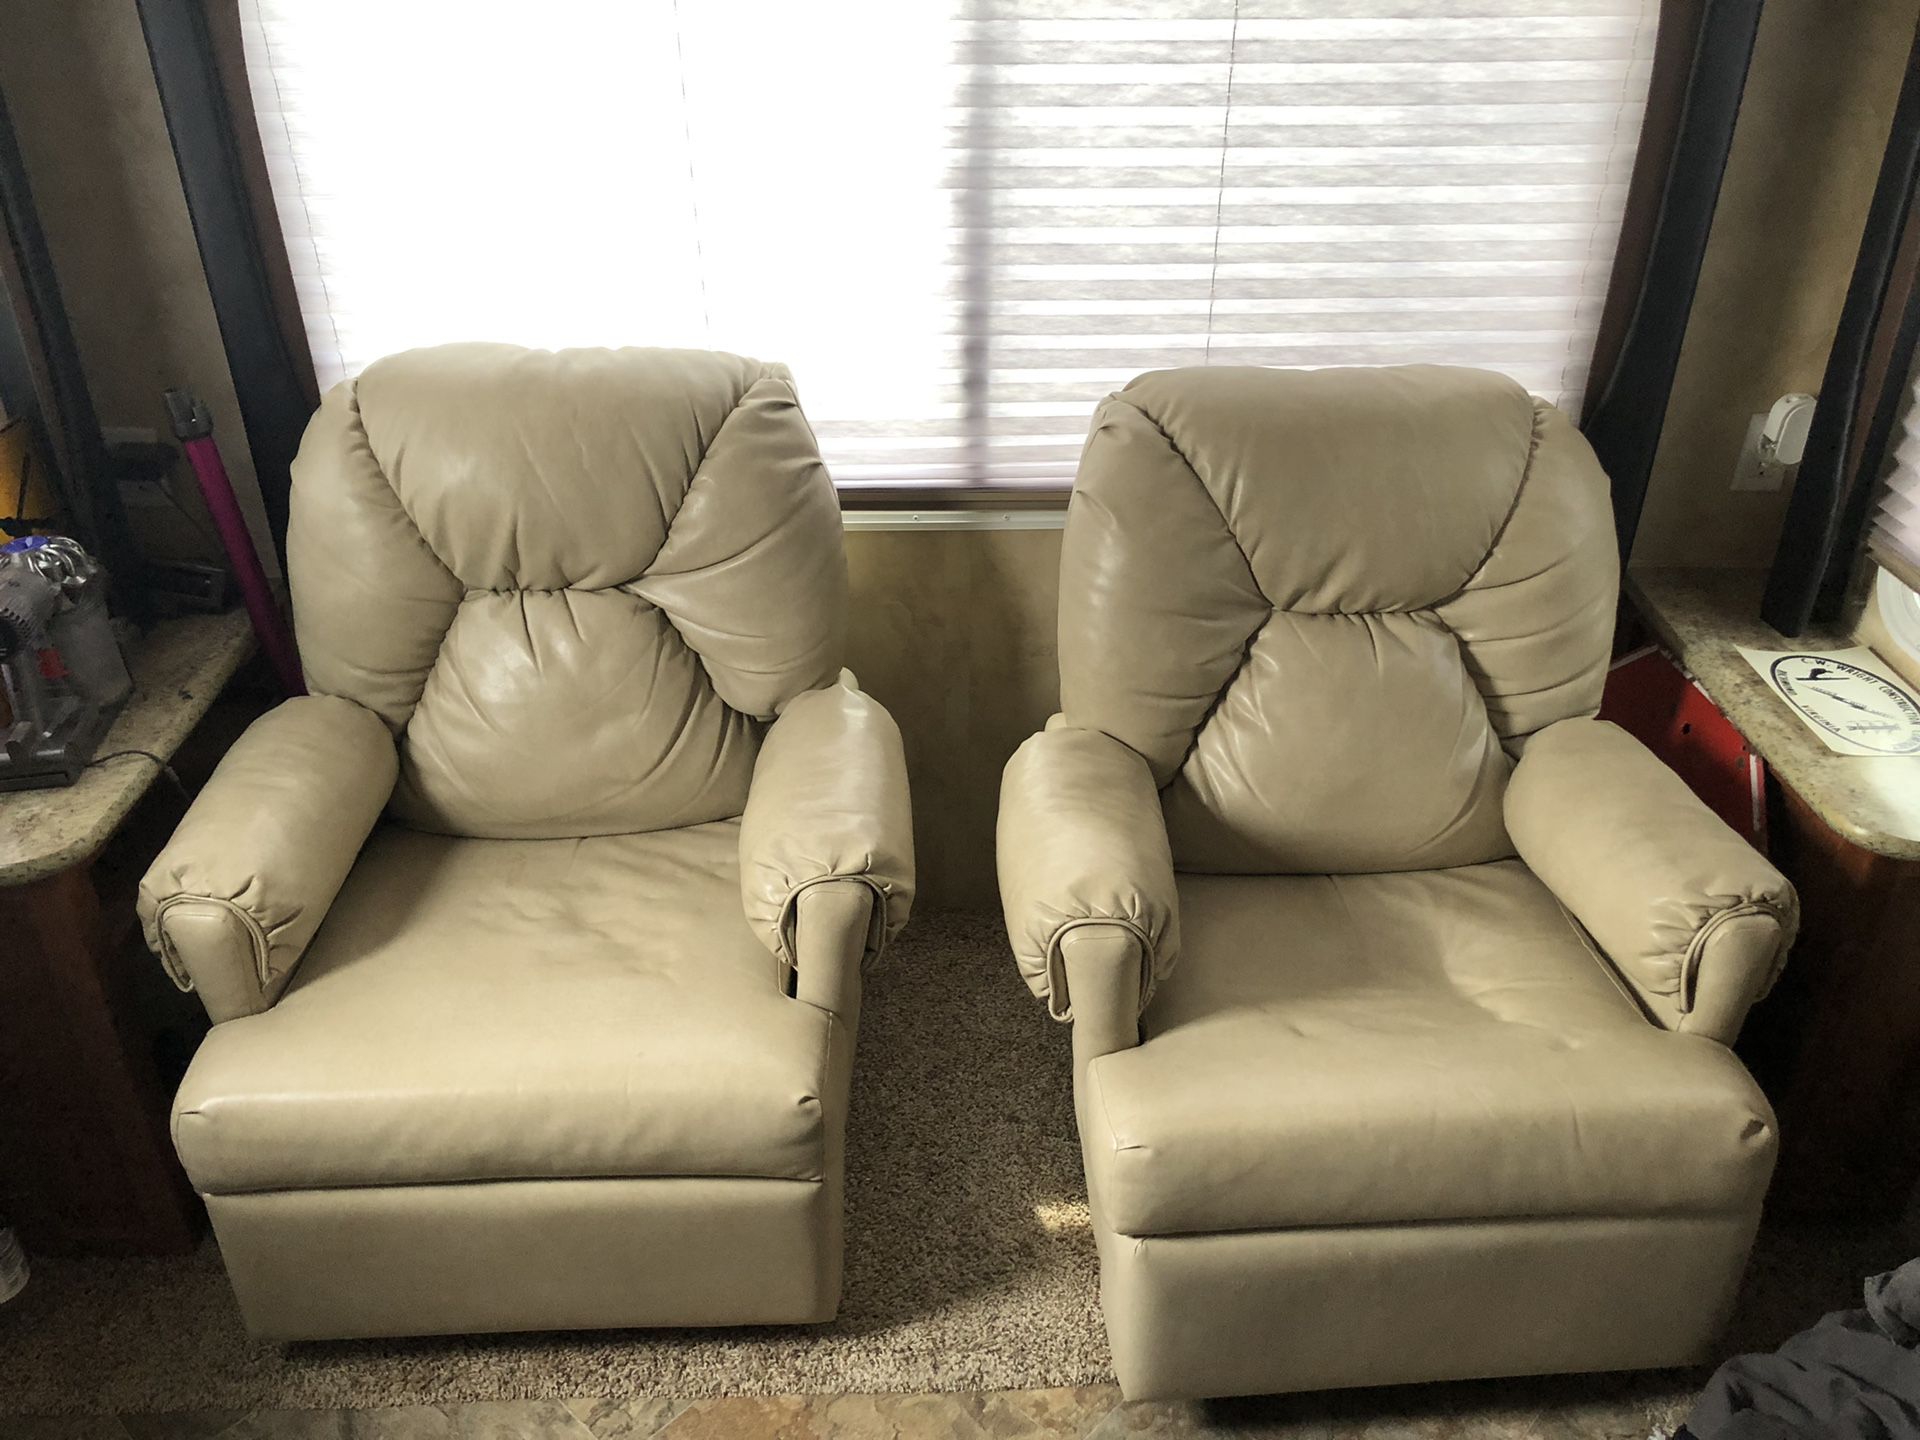 Recliner chairs both